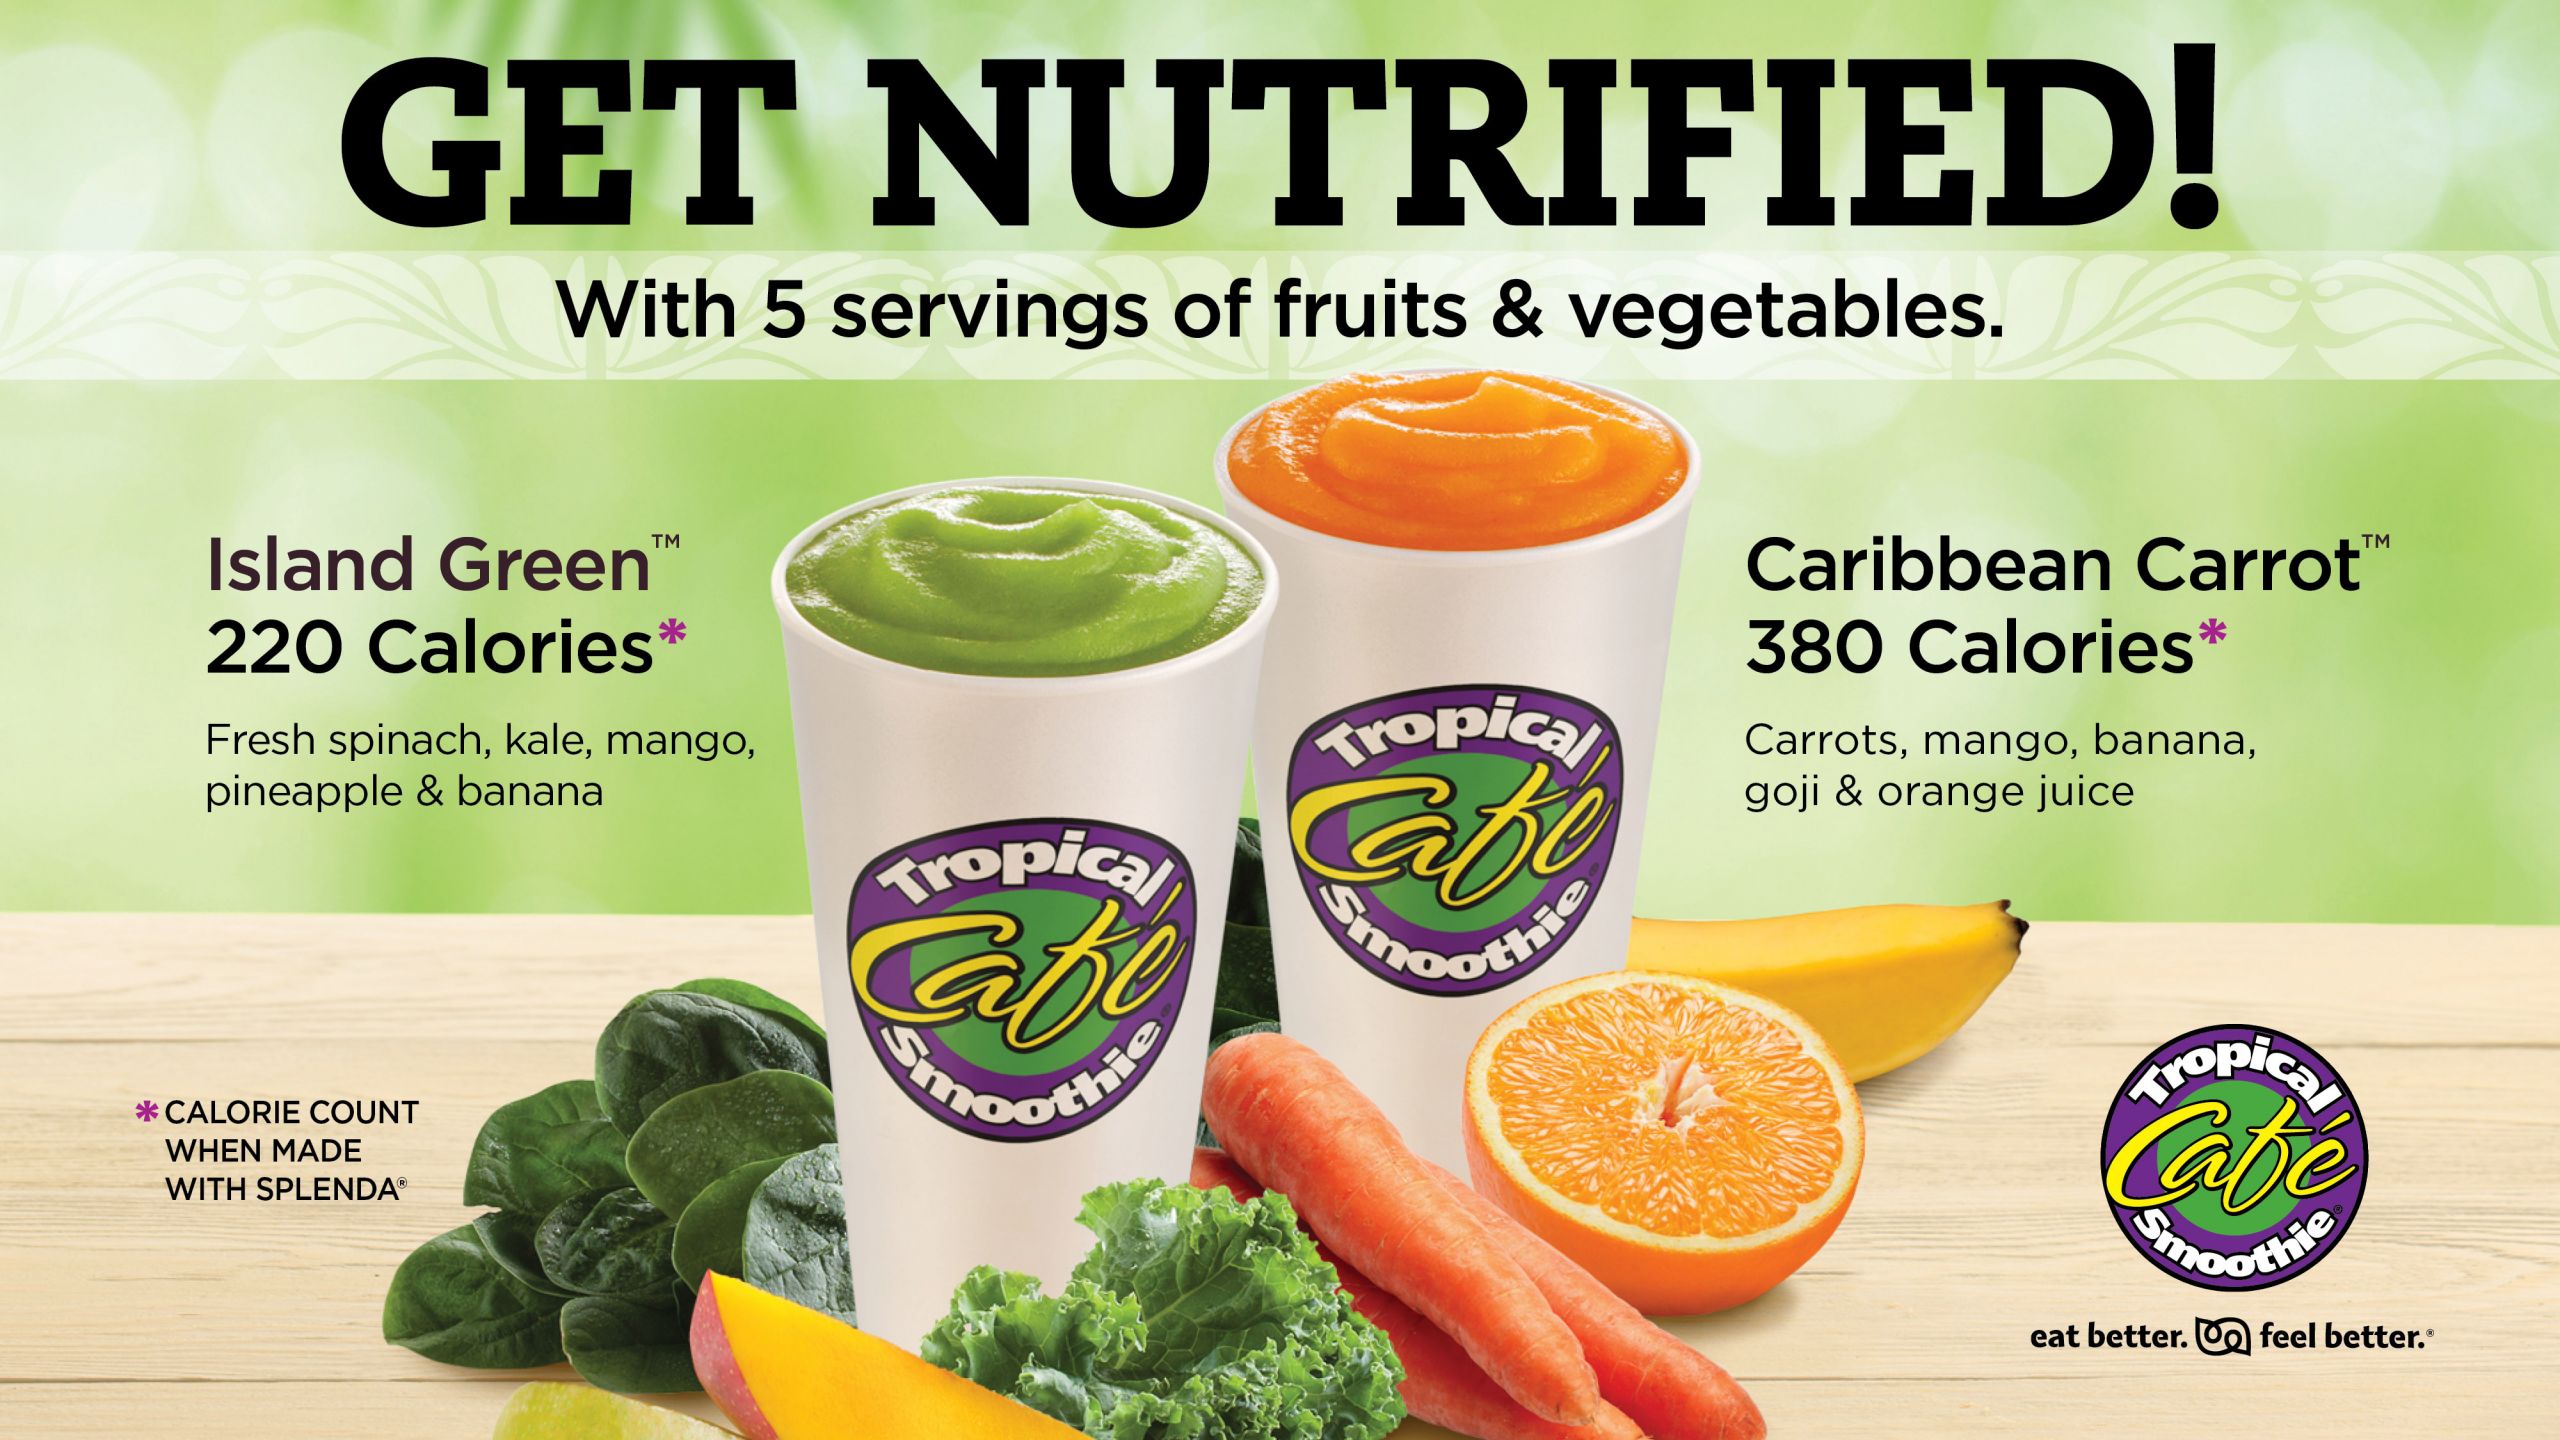 Tropical Smoothie Cafe Smoothies
 Caribbean Carrot Smoothie